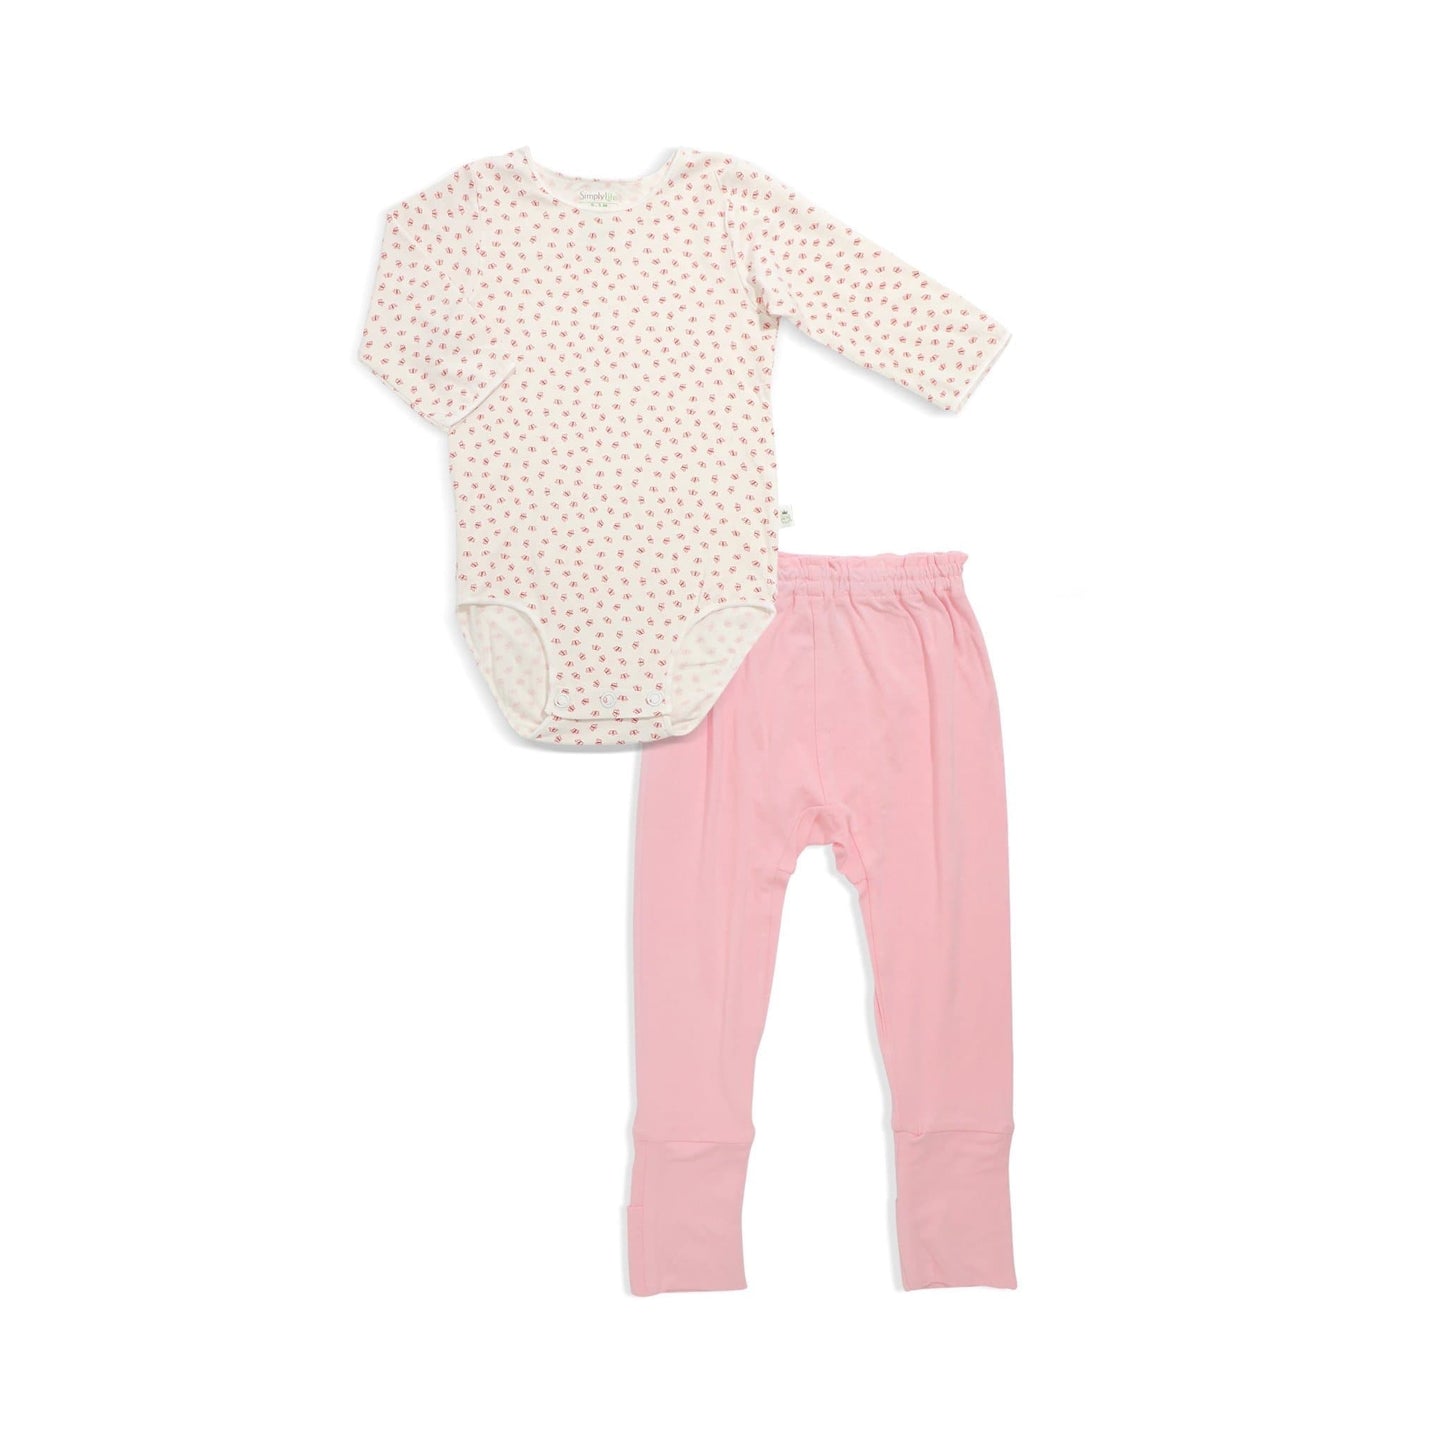 Long-sleeved Stretchy Romper with Footie Pants Set